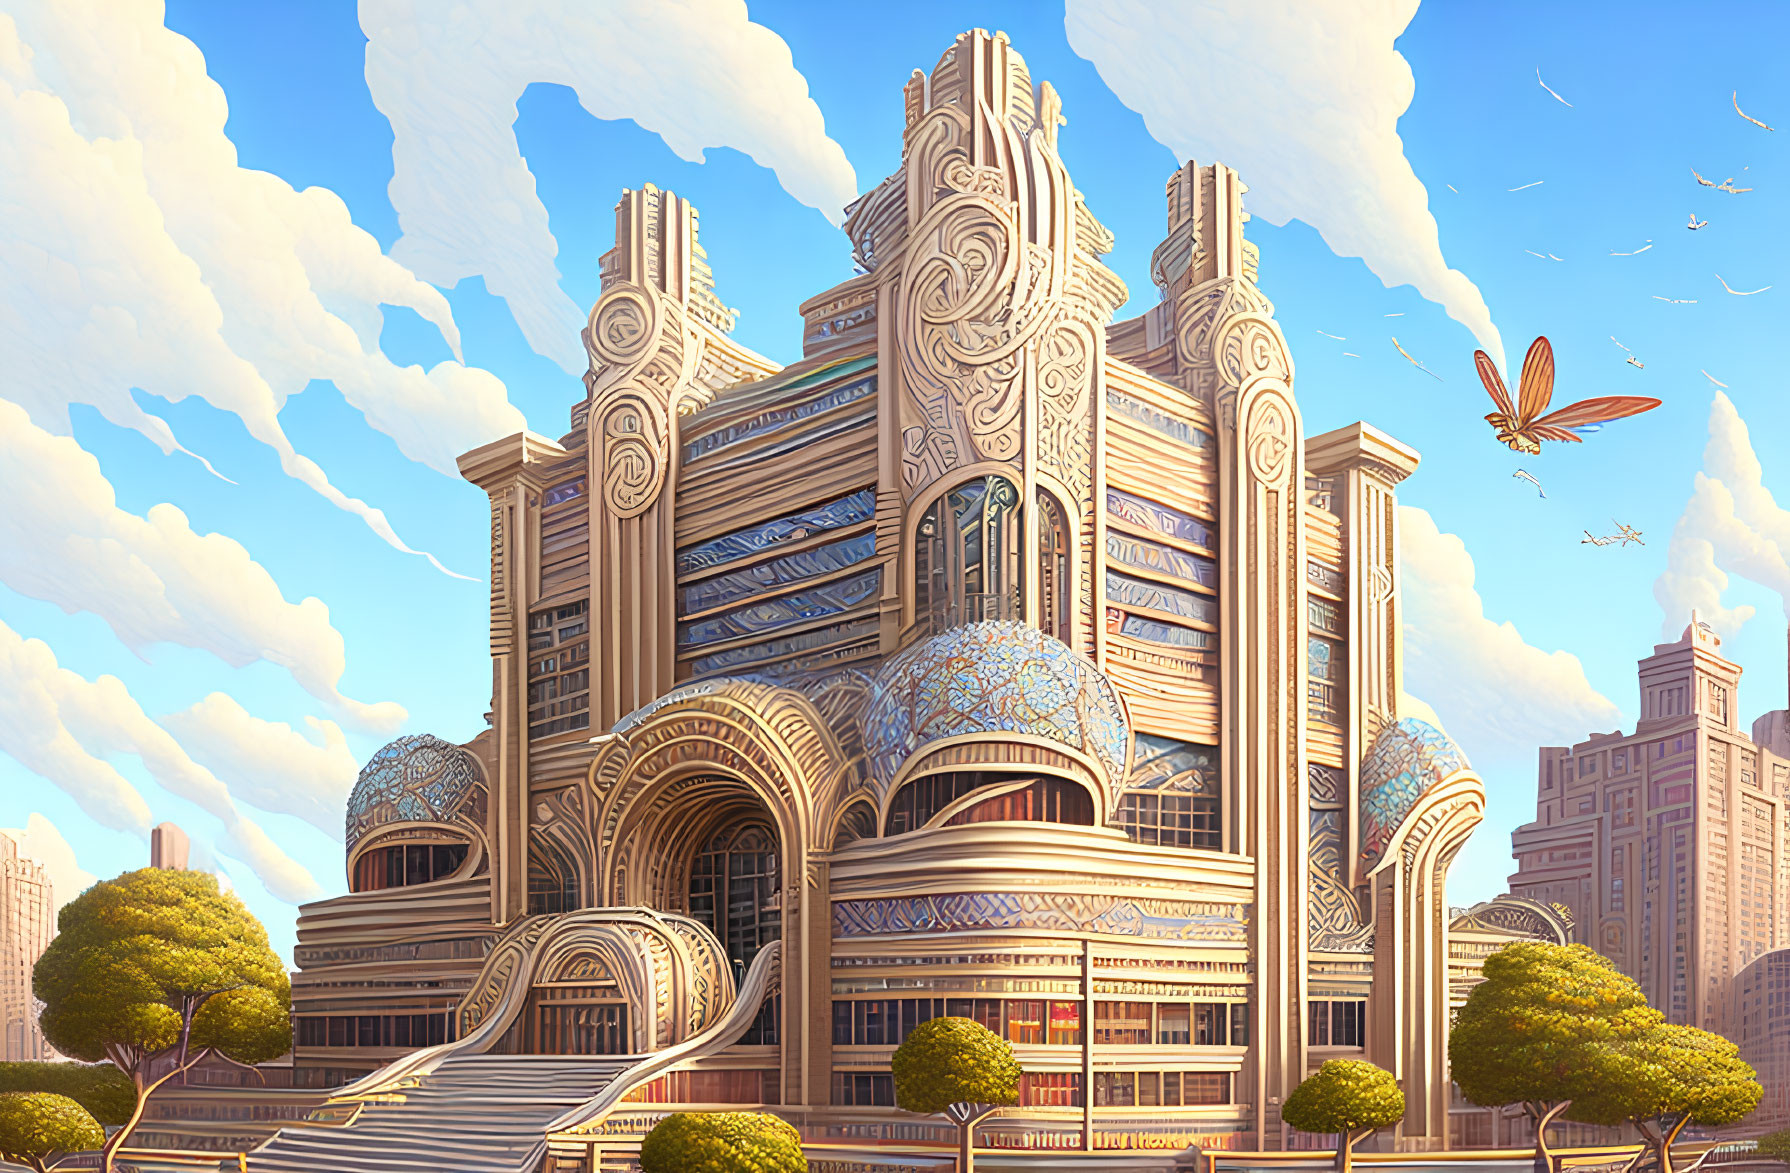 Futuristic Art Deco Building with Glass Domes and Flying Vehicles